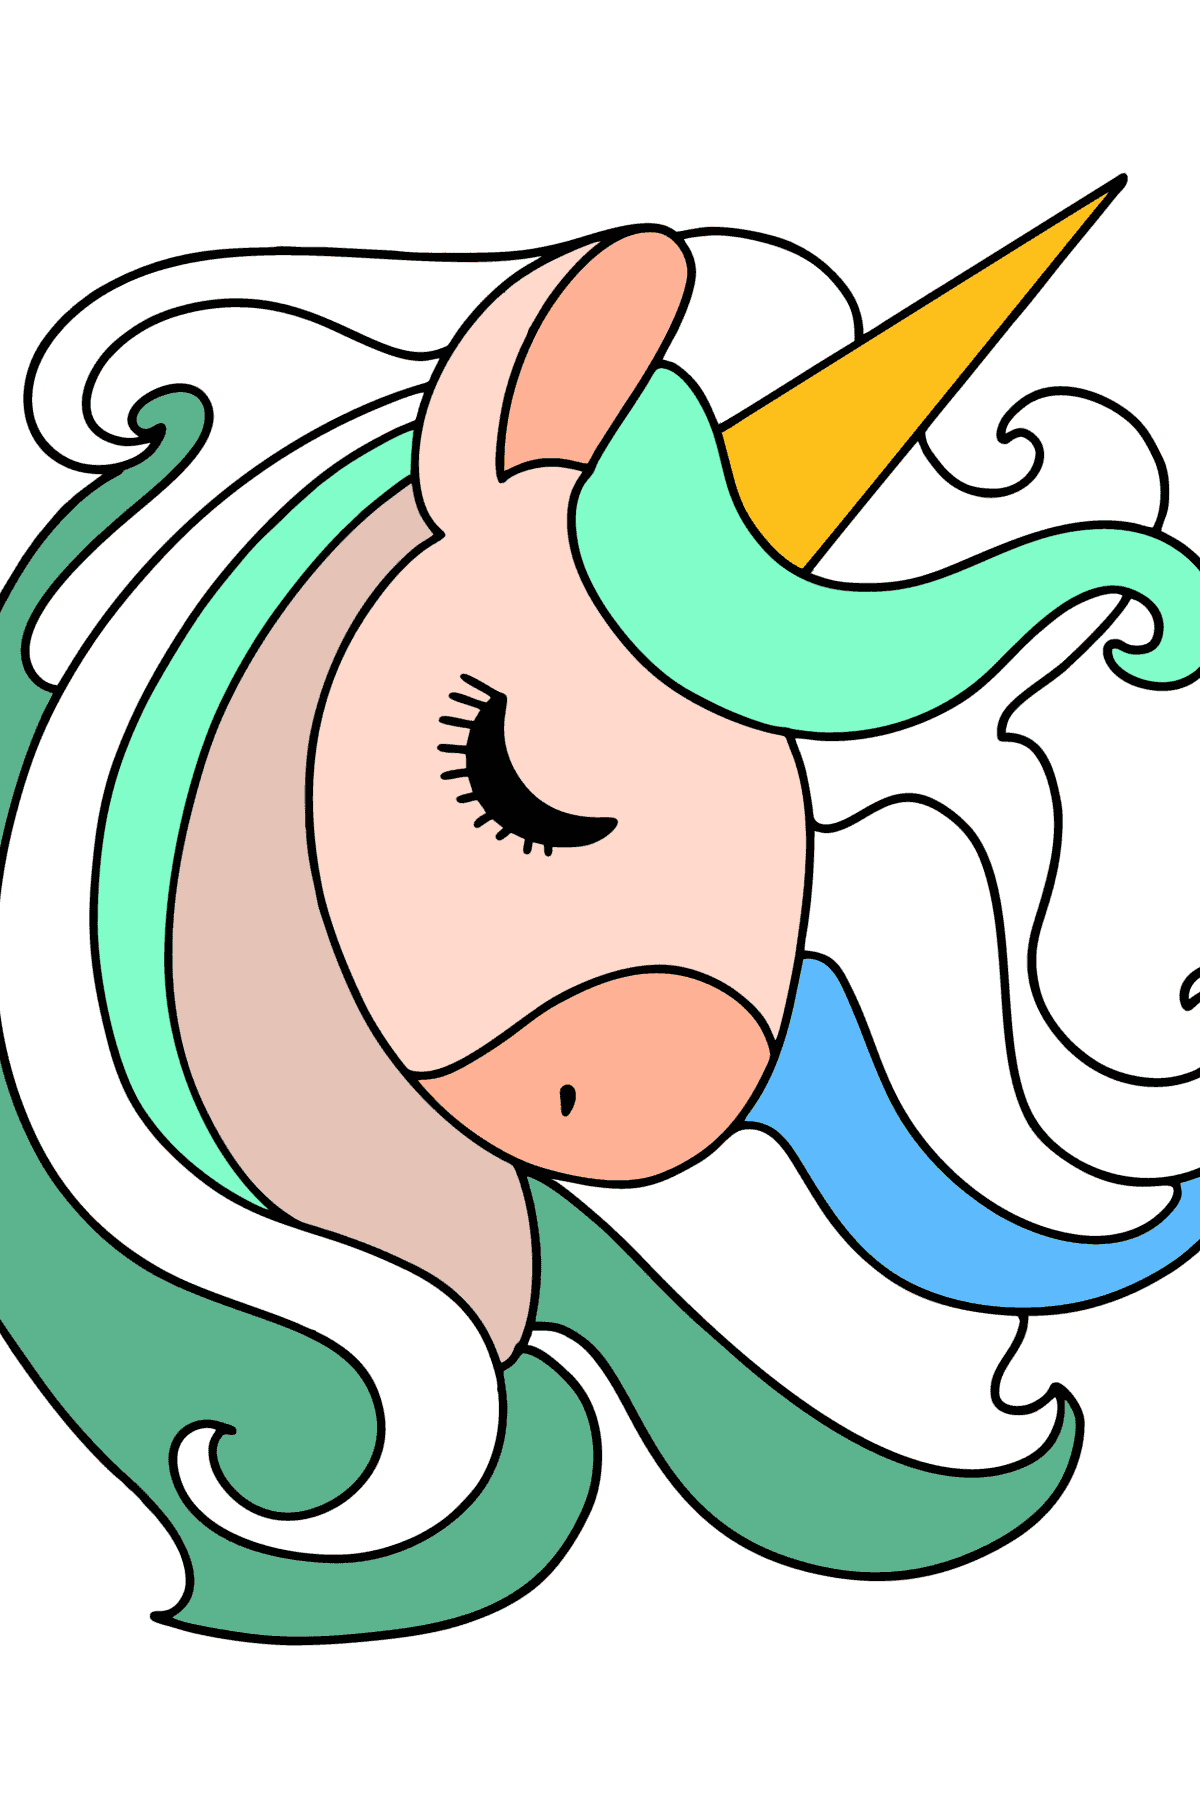 Unicorn head for kids coloring page - Coloring Pages for Kids